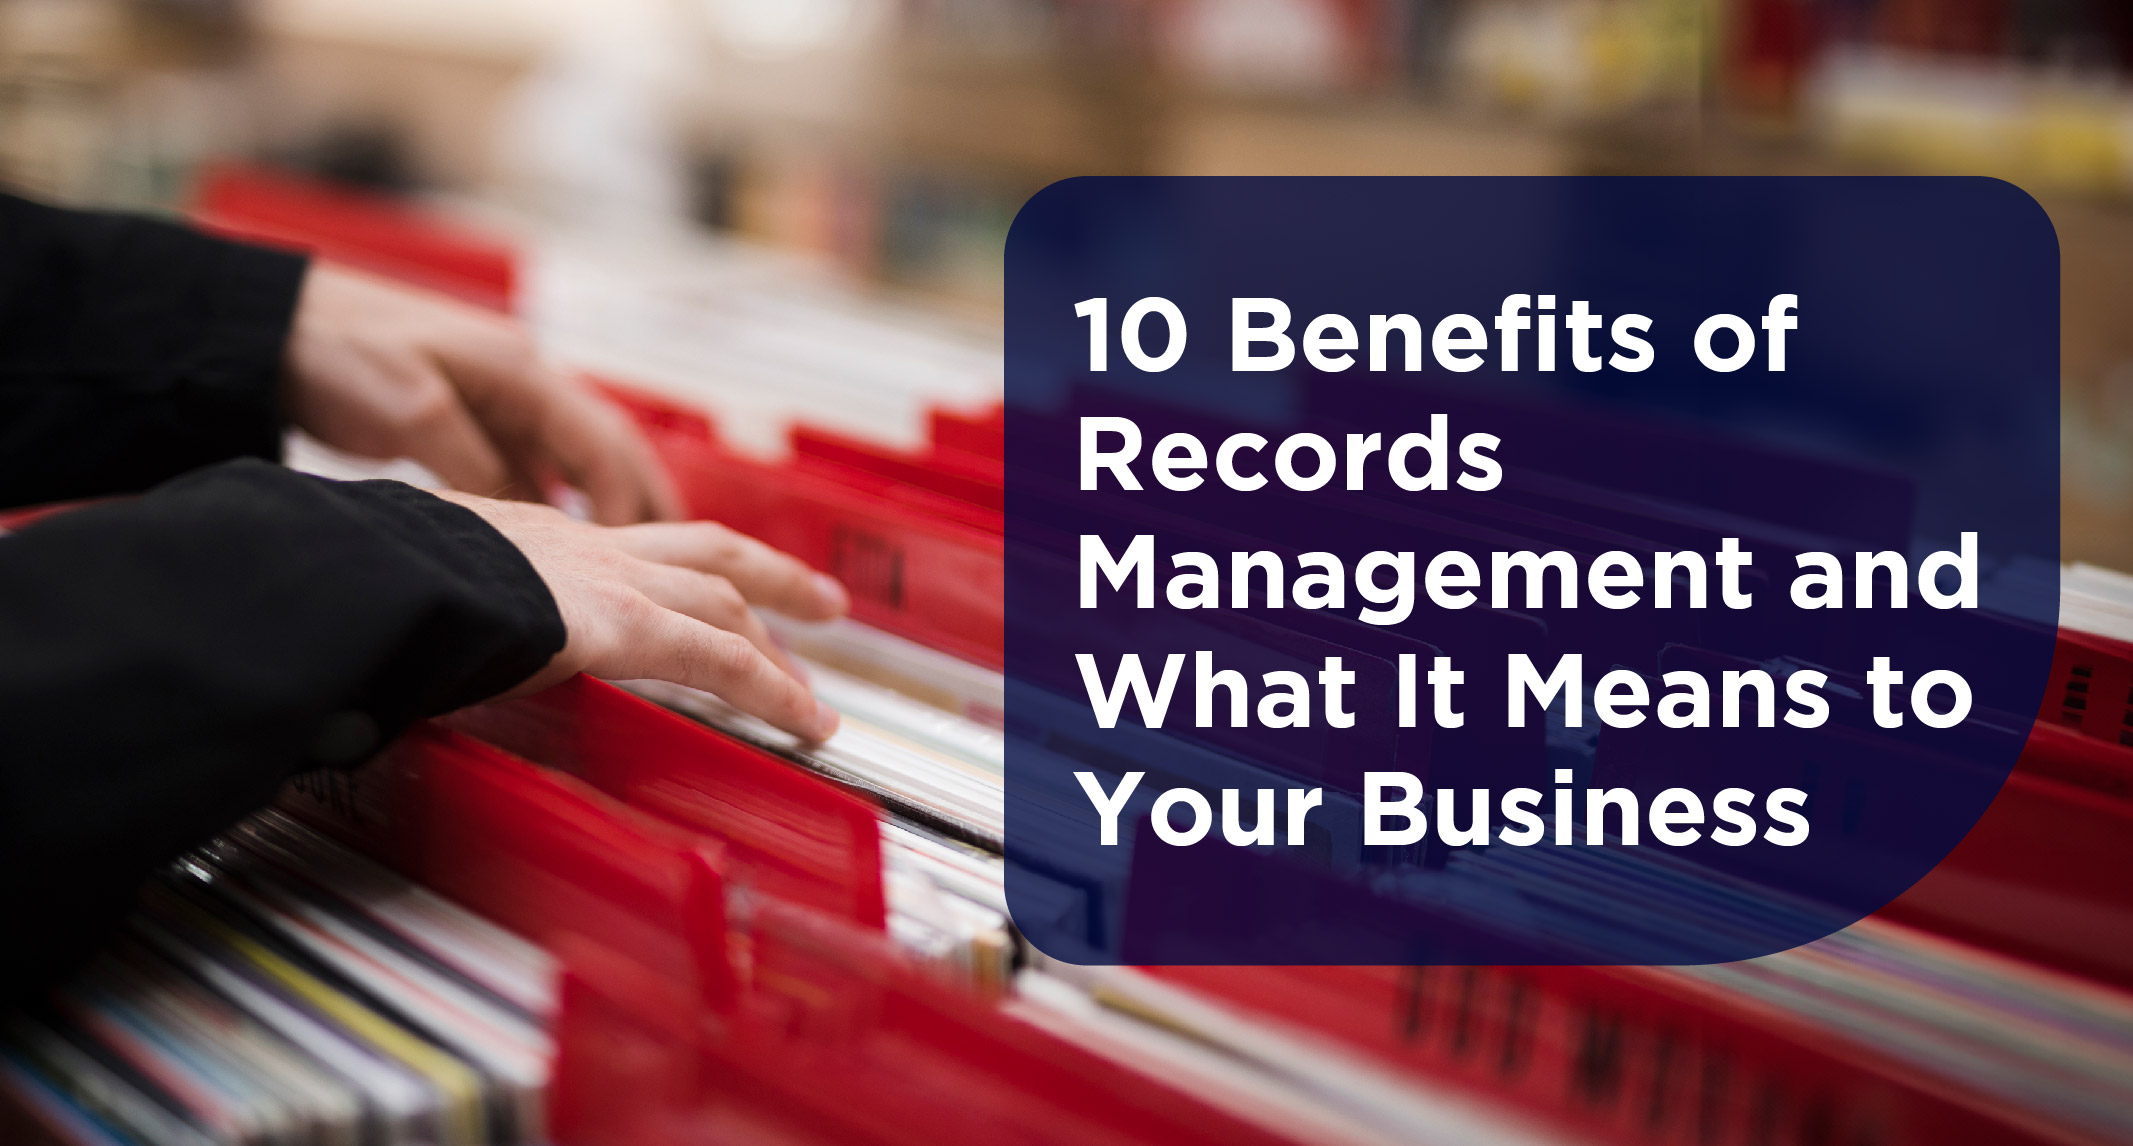 Benefits of Records Management